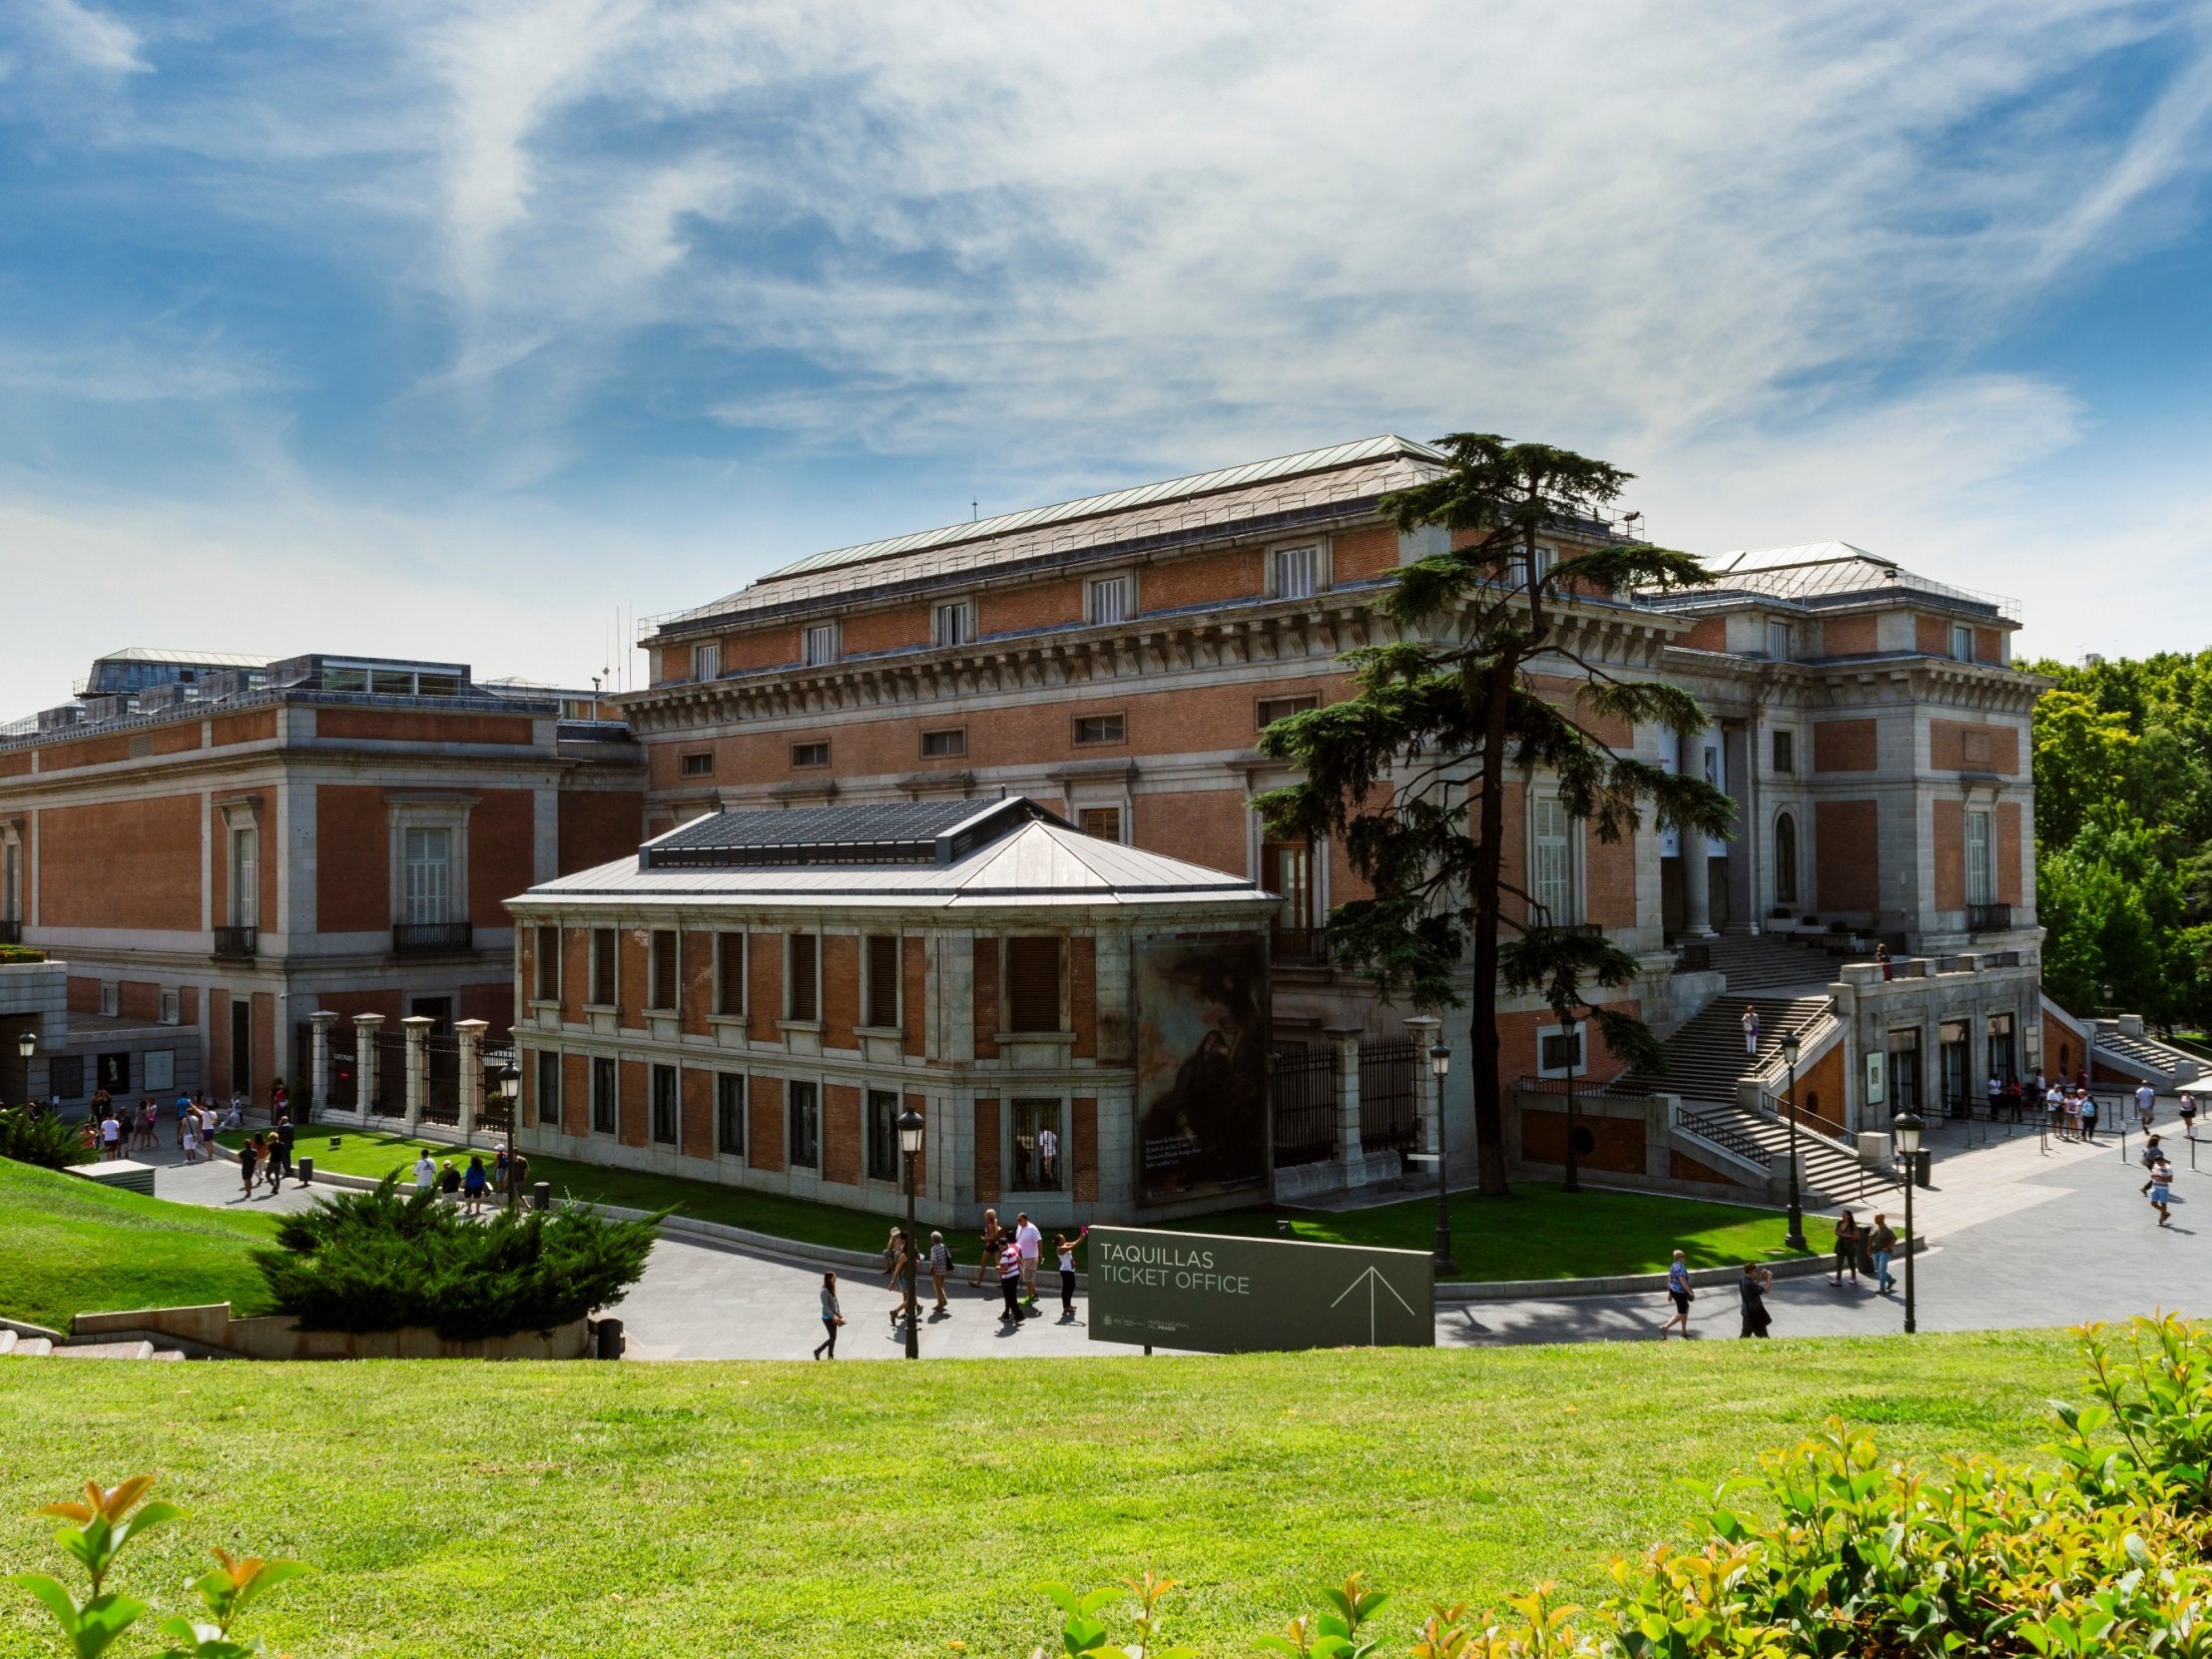 The Prado was originally?commissioned by King Charles III of Spain to be a museum of natural science